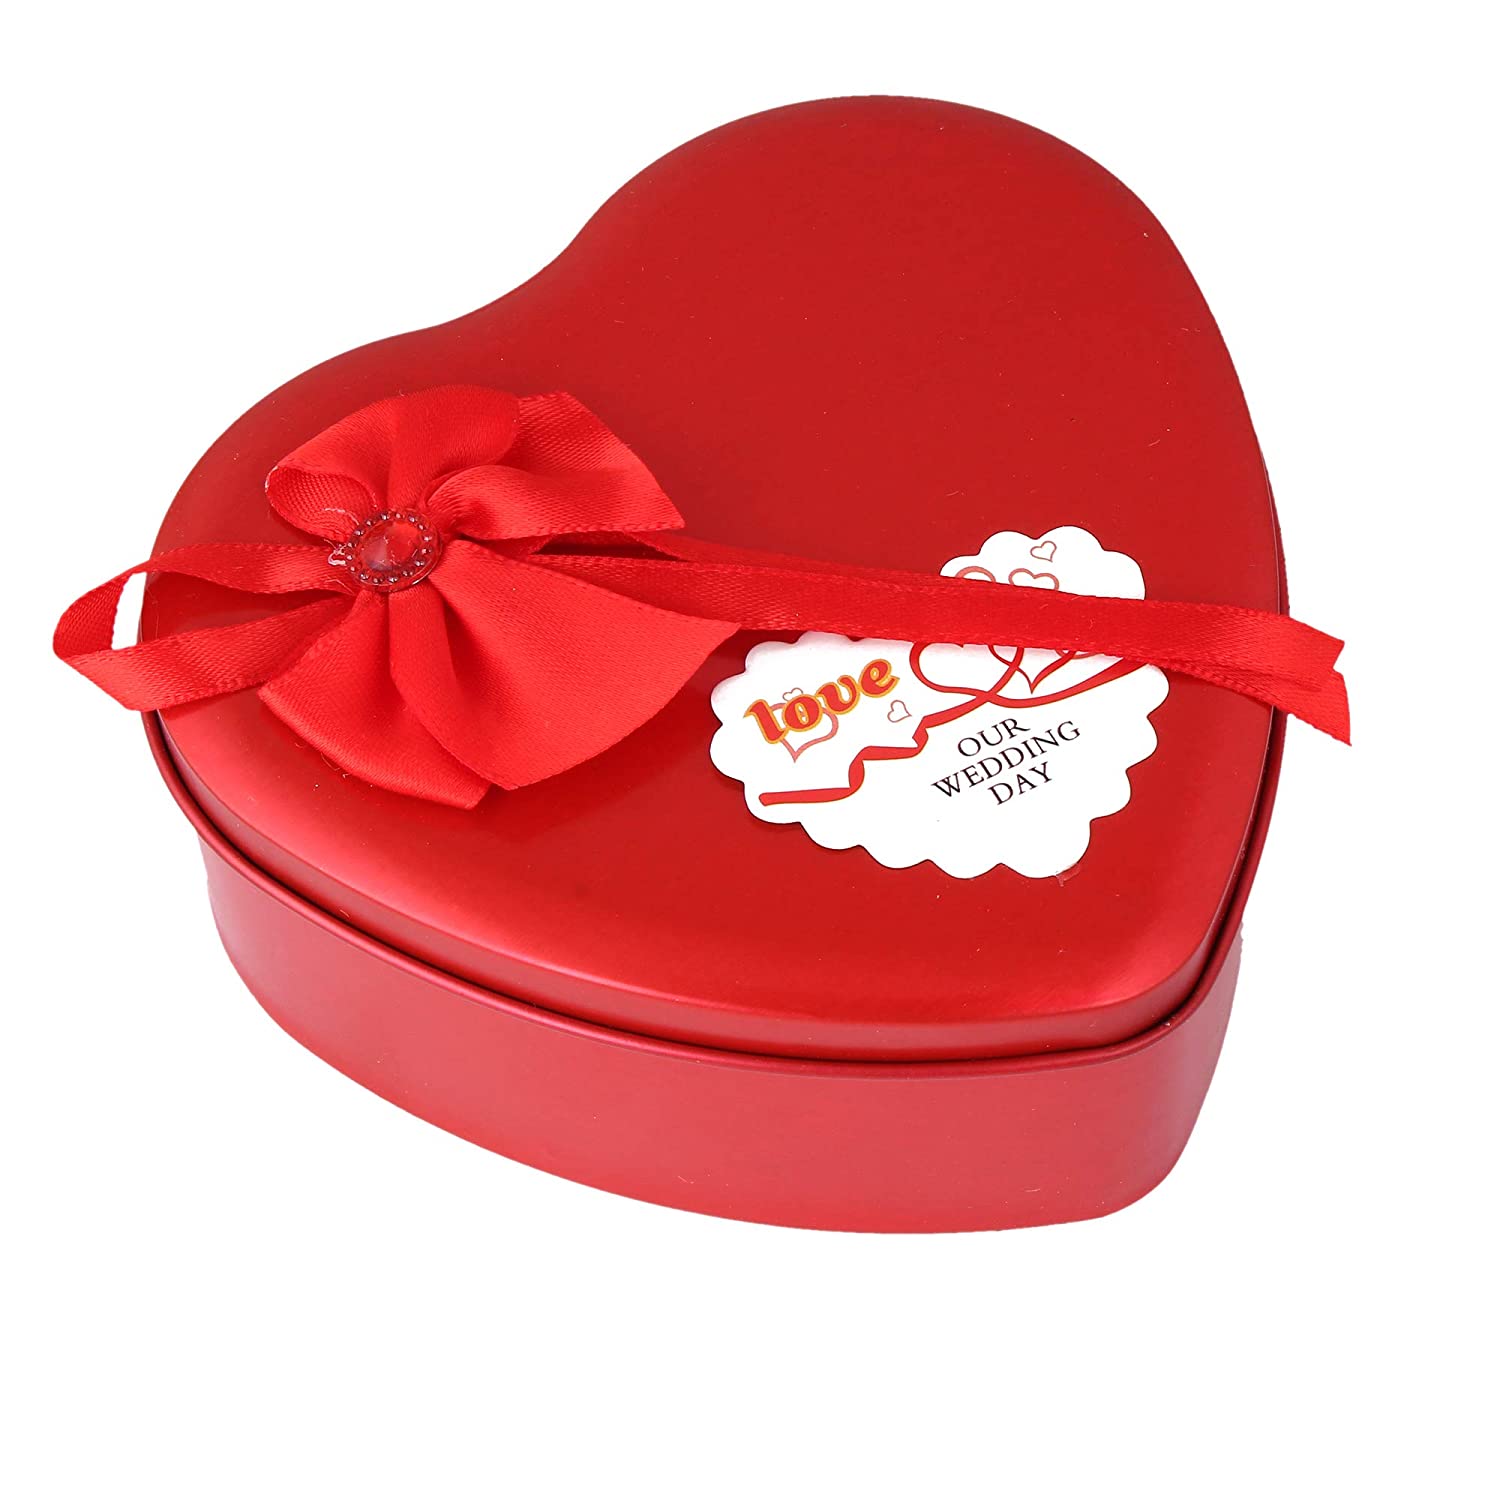 Best Romantic Gifts for Girls, Boys - Chocolate, Heart Shape Box with Small  Teddy, 1 Golden Rose and 3 Red Rose